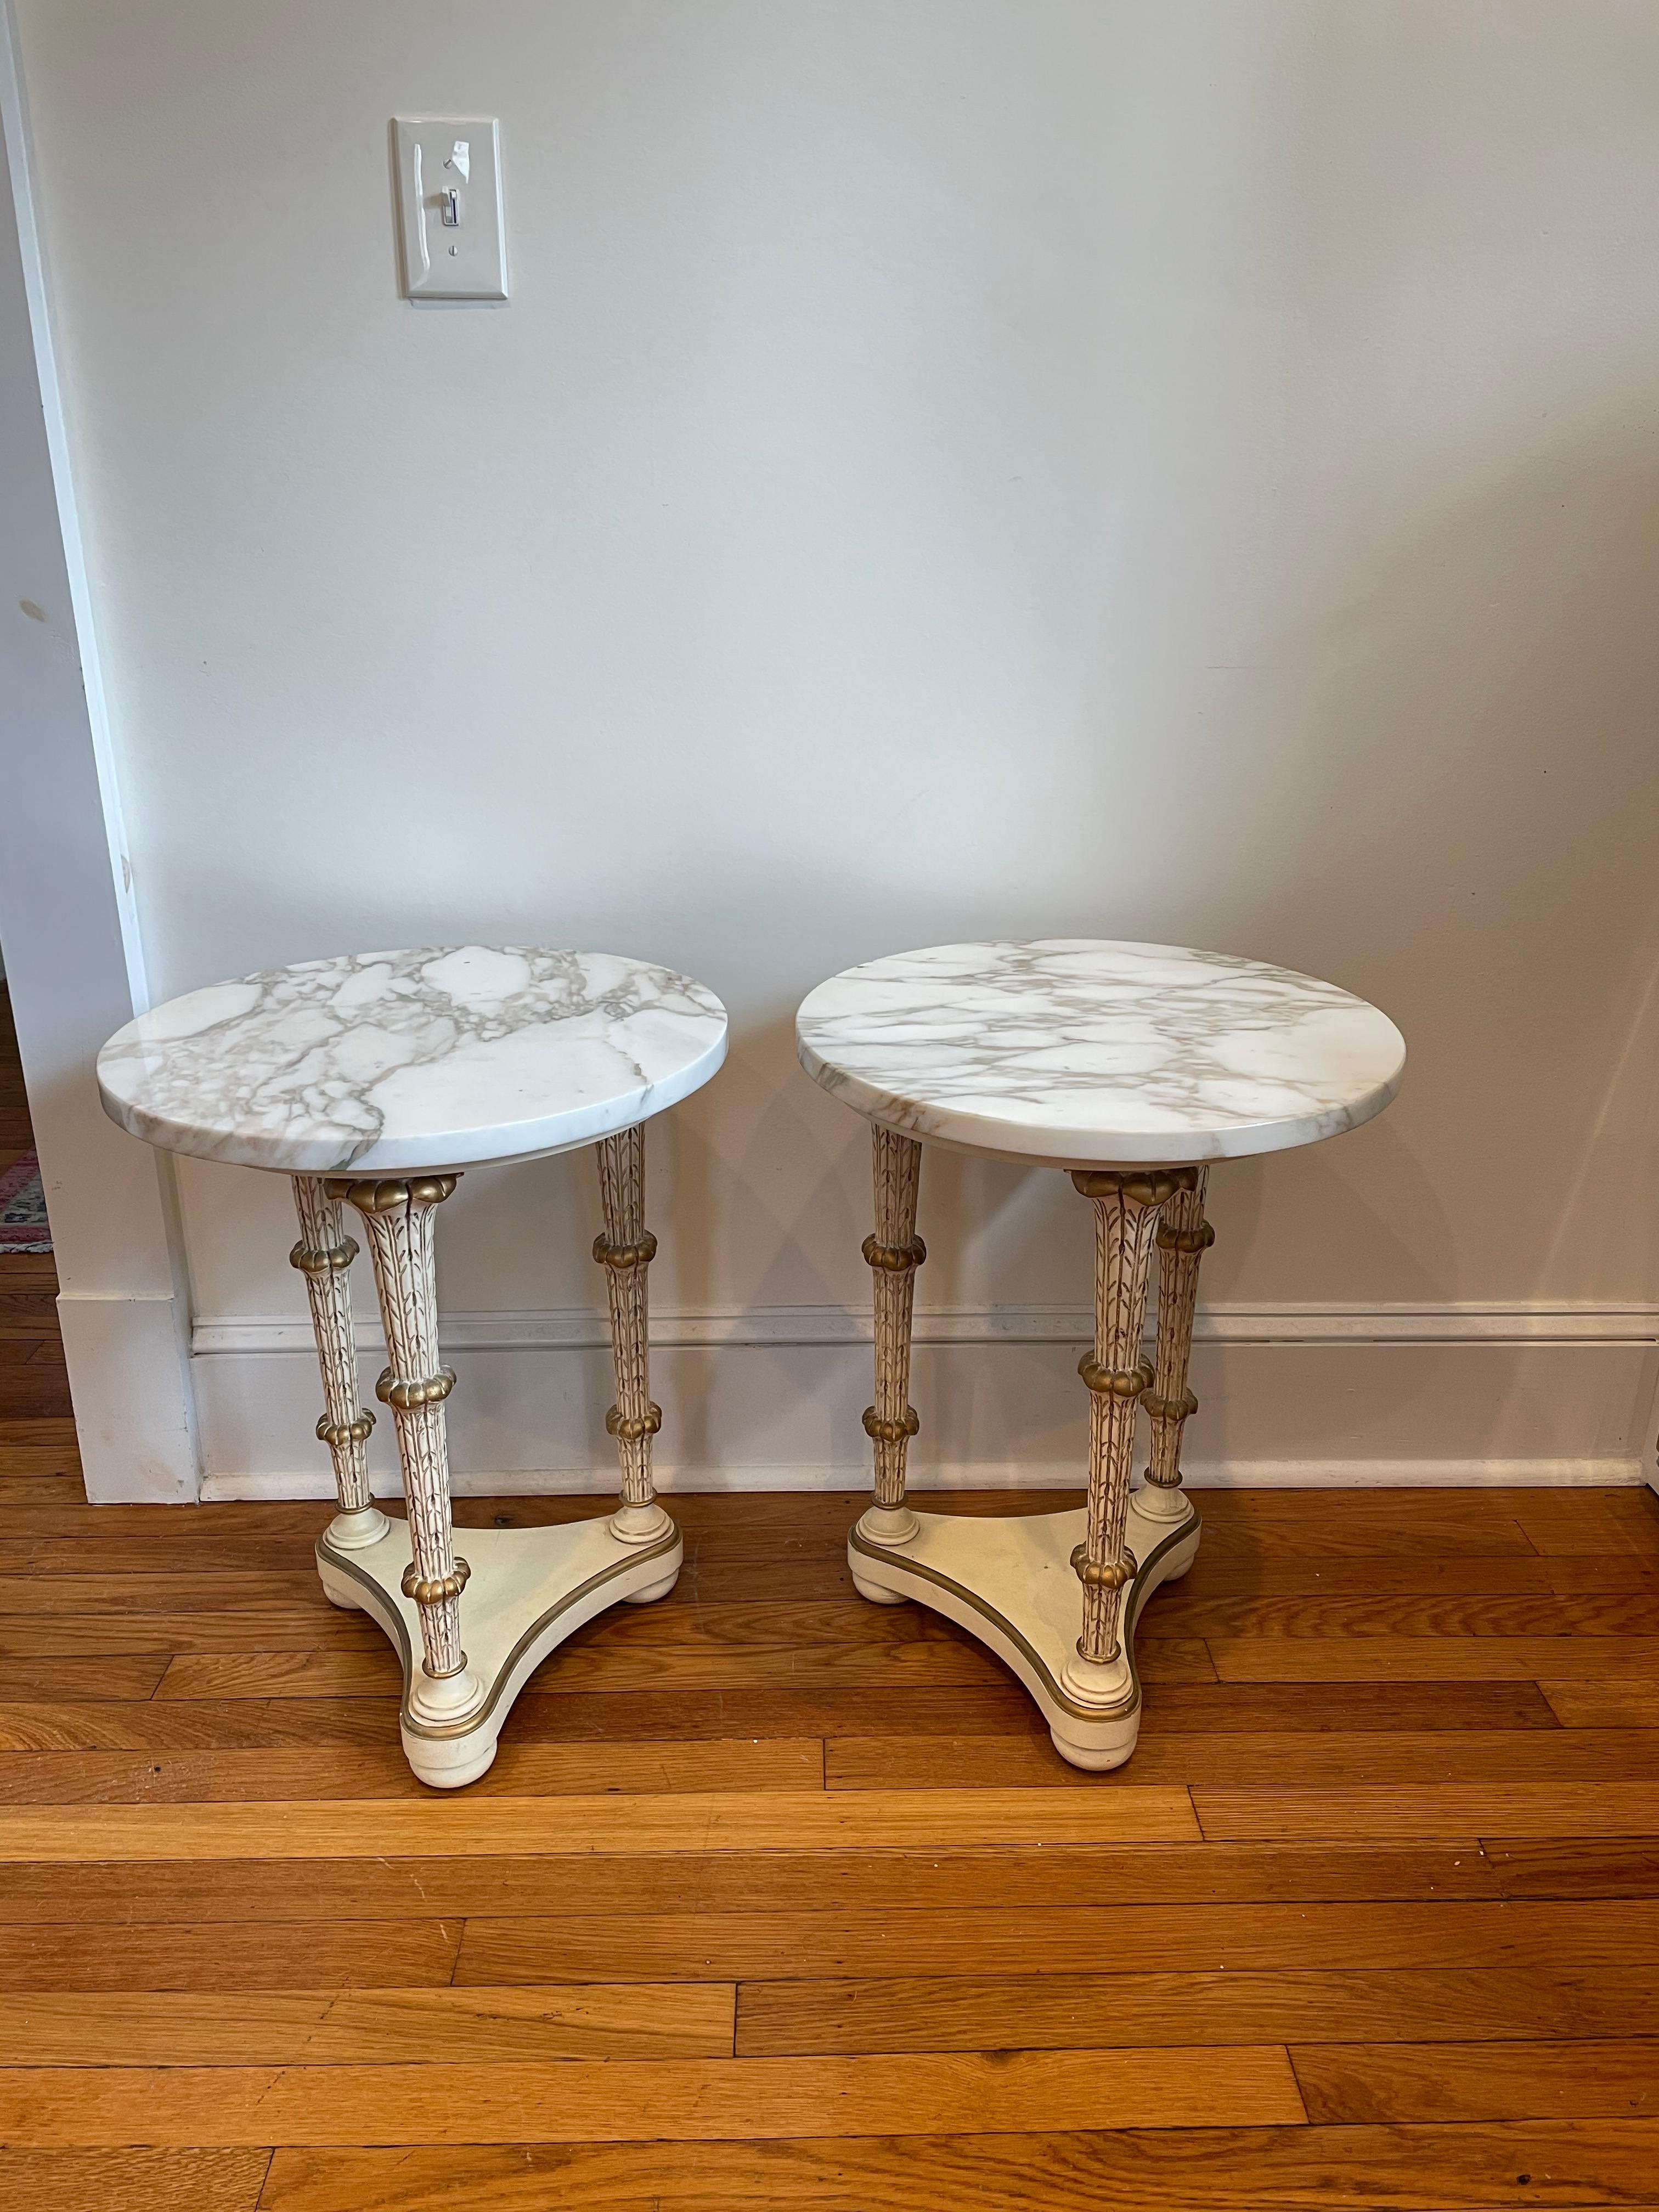 Mid 20th Century Neoclassical Style Marble Top Palm Frond Gueridon Tables In Good Condition For Sale In W Allenhurst, NJ